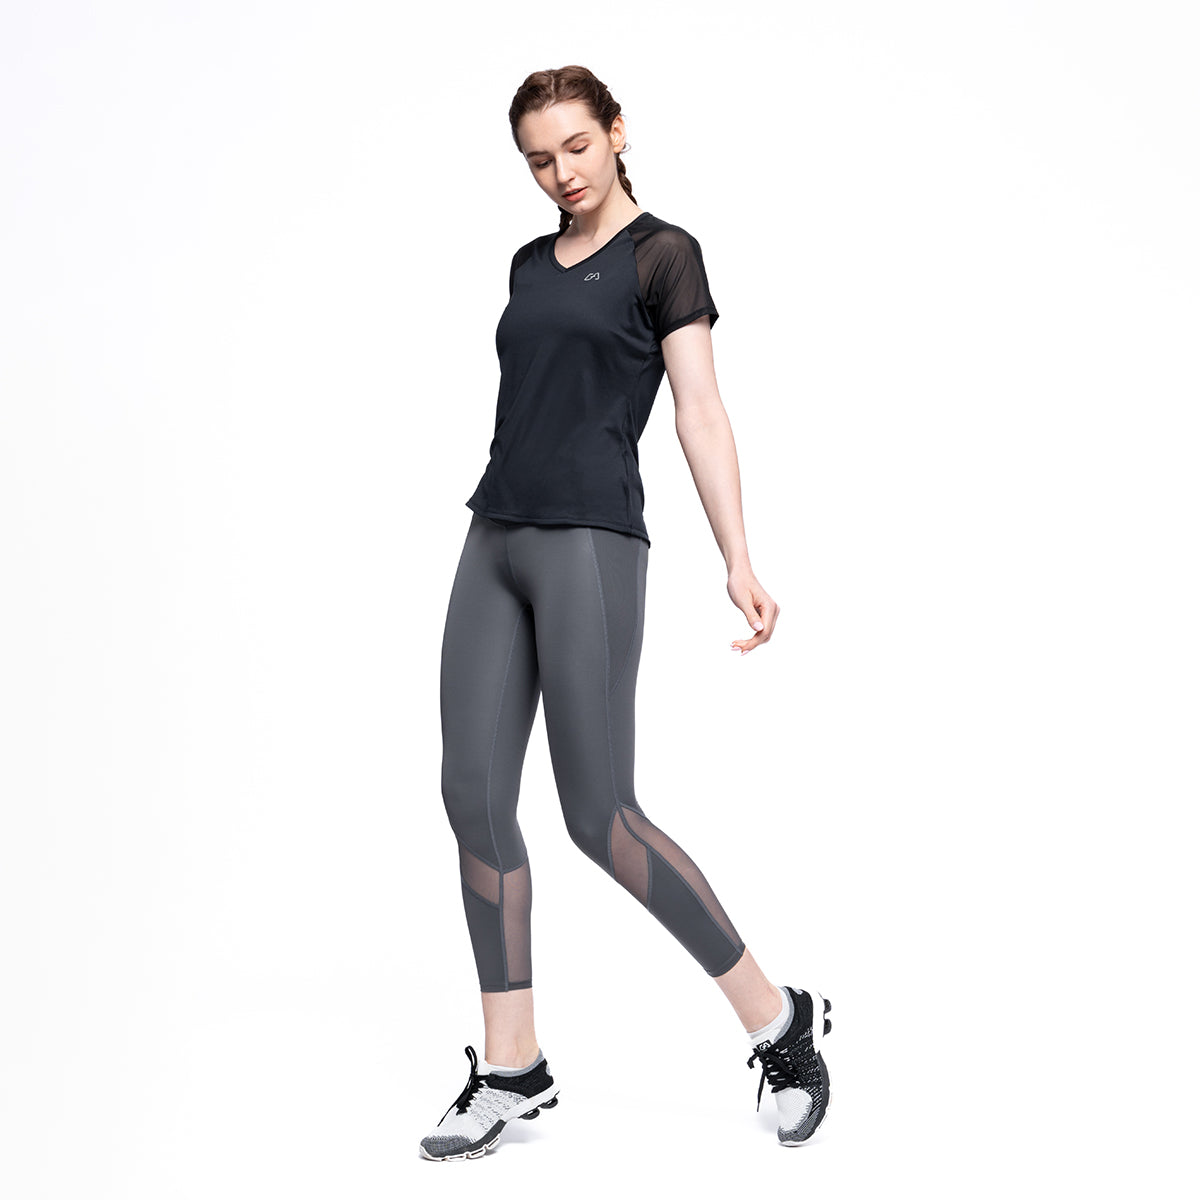 Find more Champion Black & Turquoise Yoga Pants. S for sale at up to 90% off